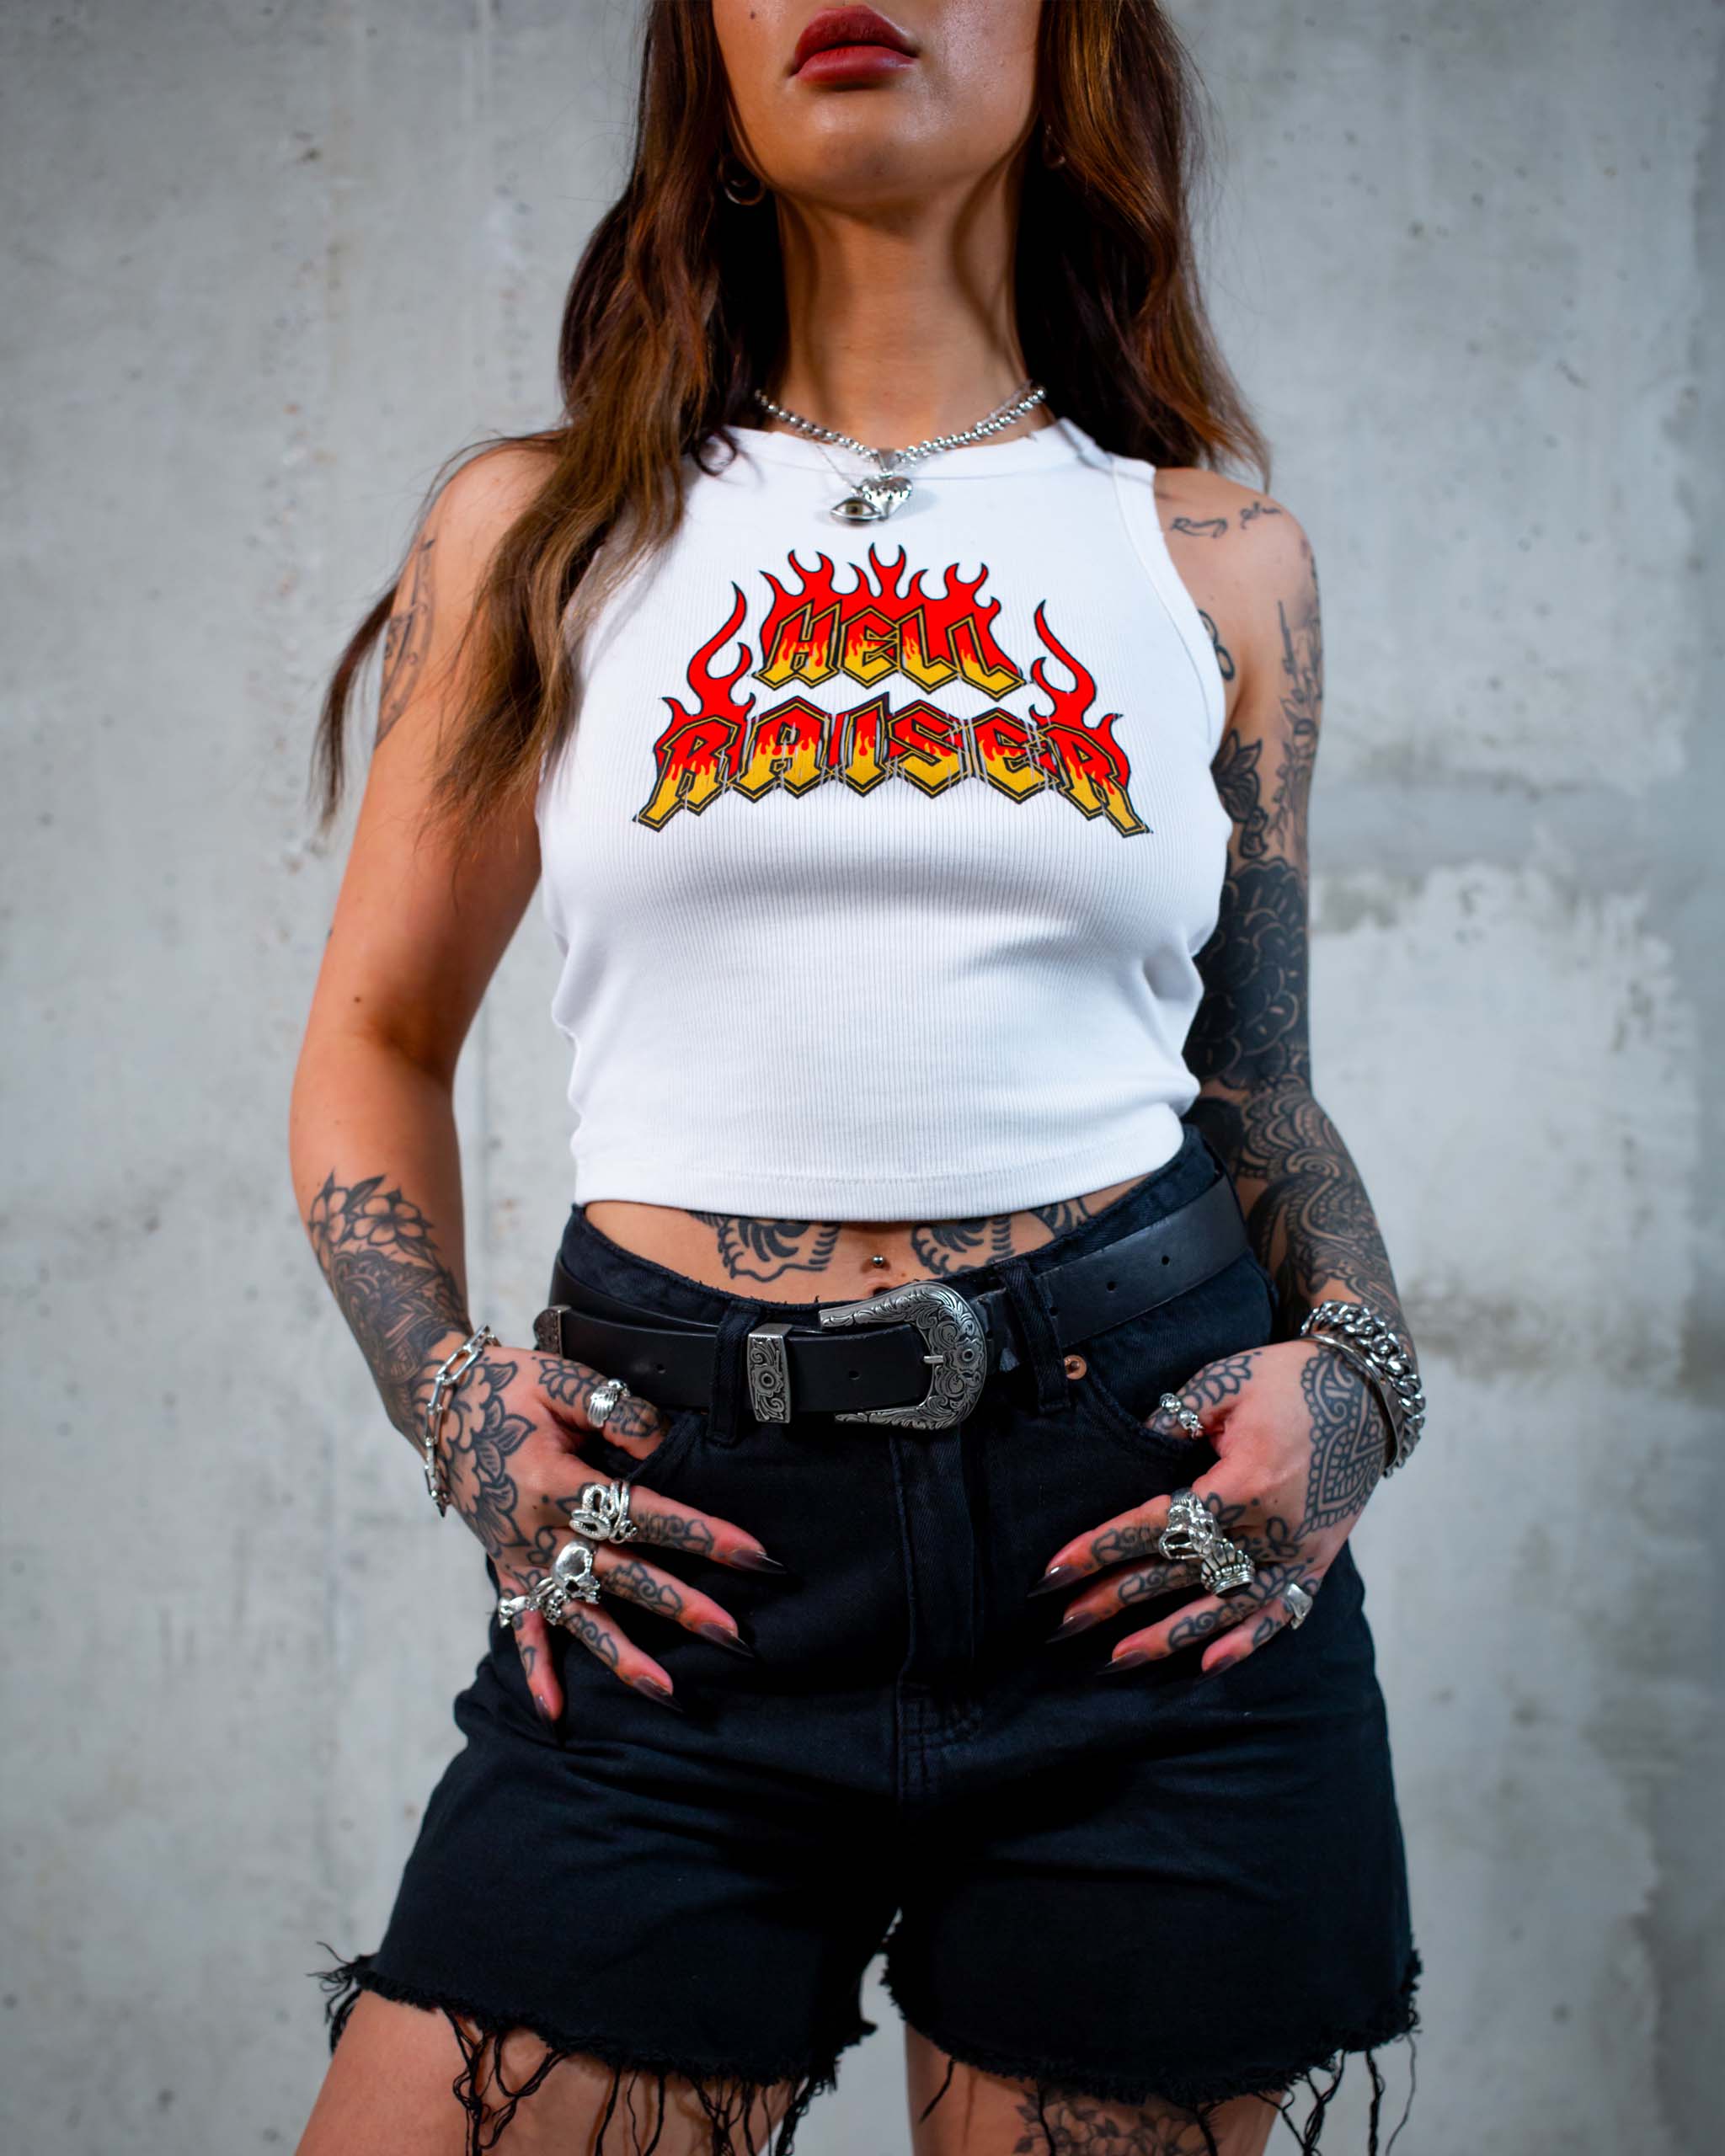 The Hell Raiser biker tank top by Sleazy Rider, featuring a flaming text graphic